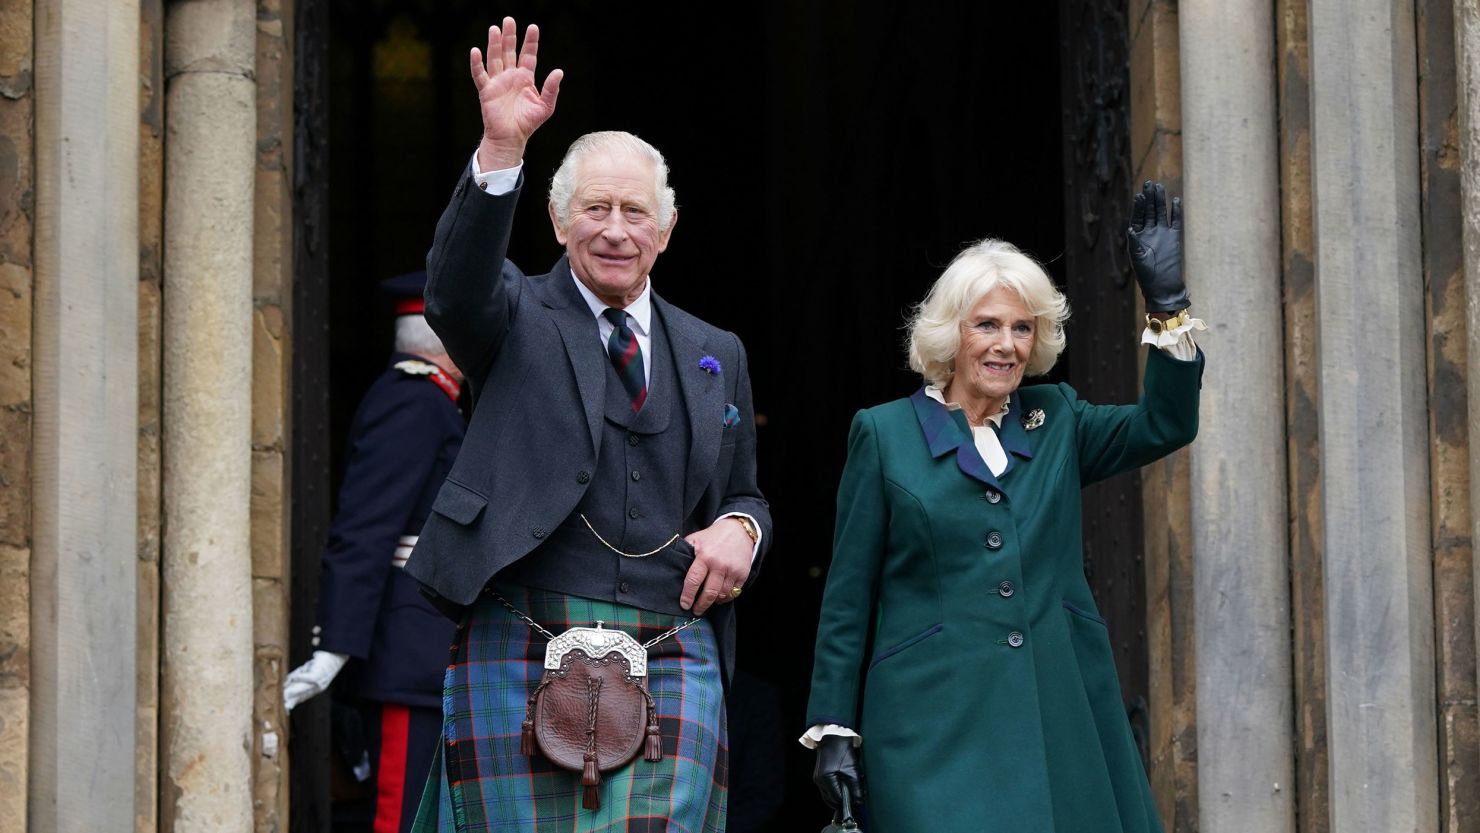 King Charles III and Camilla, Queen Consort, wave as they leave Dunfermline Abbey in Scotland.